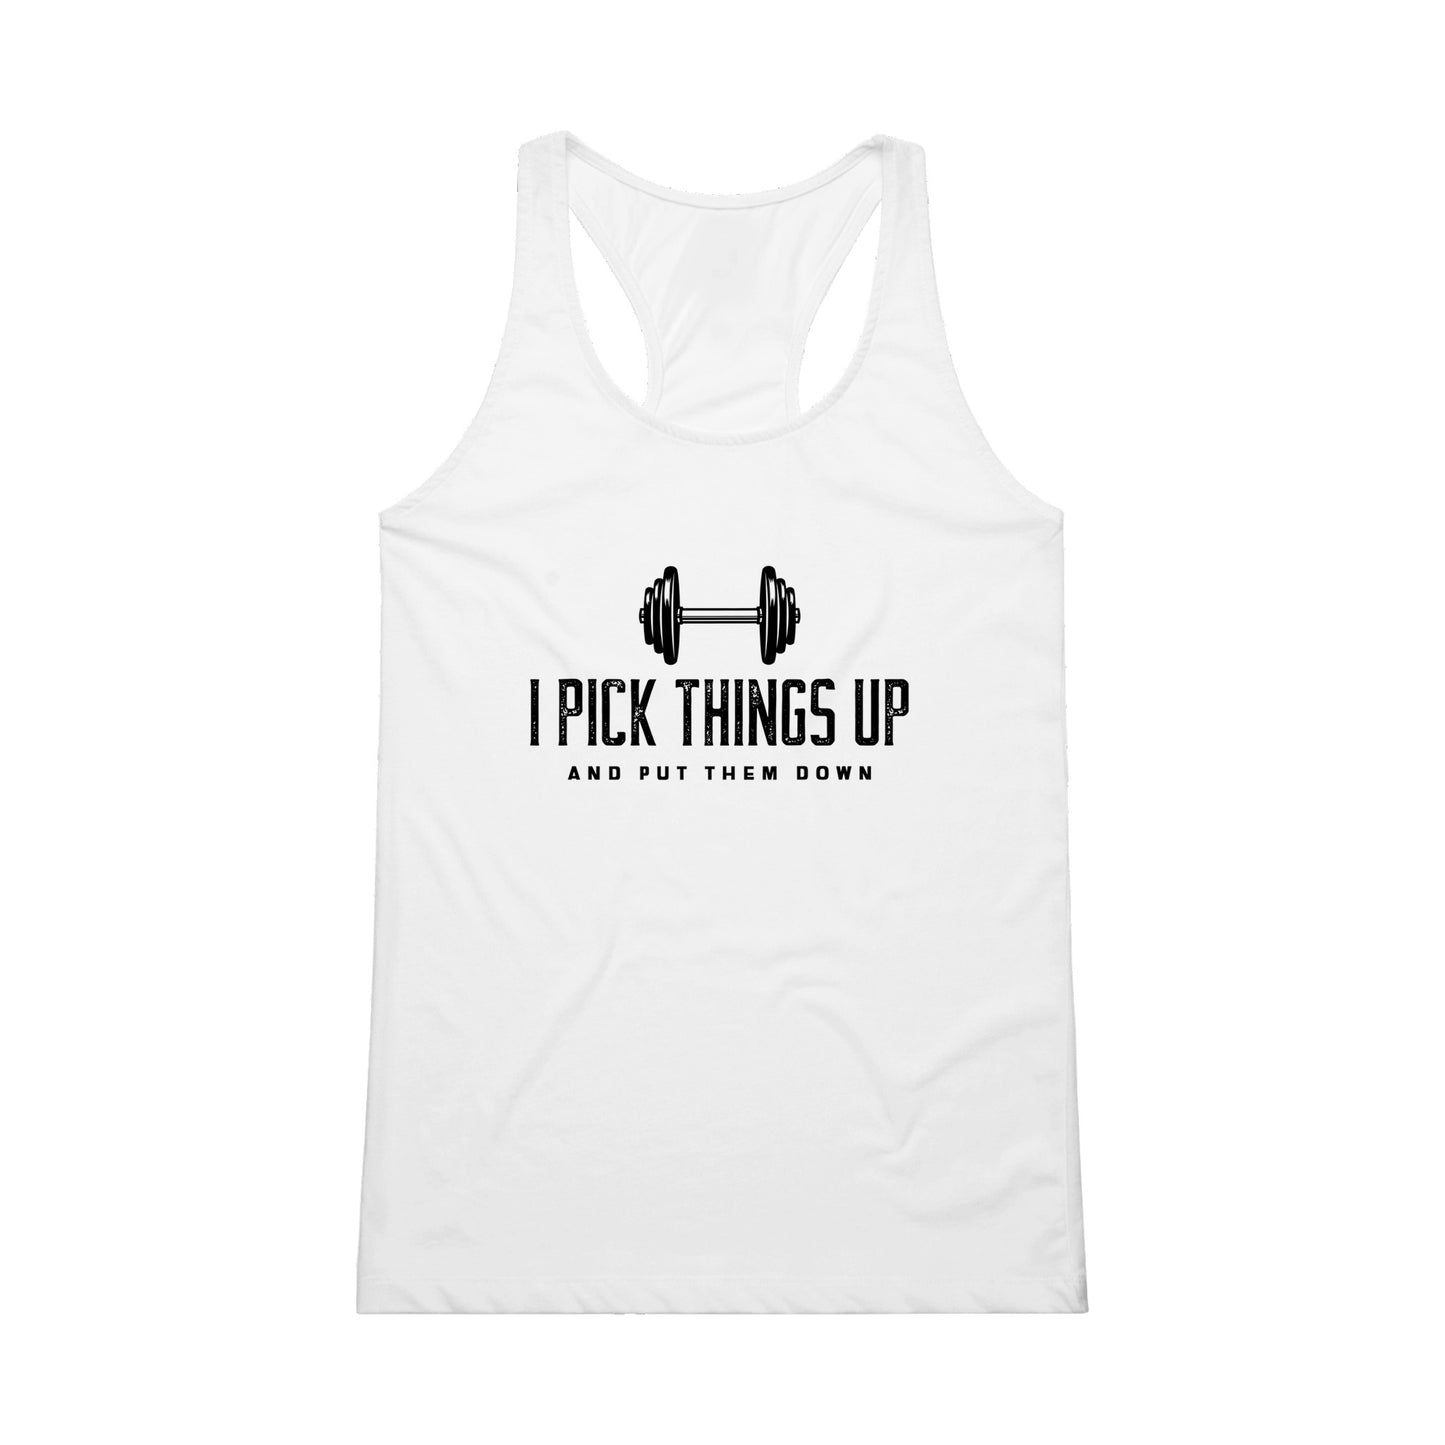 The "Strong Things" Performance Womens Tank Top